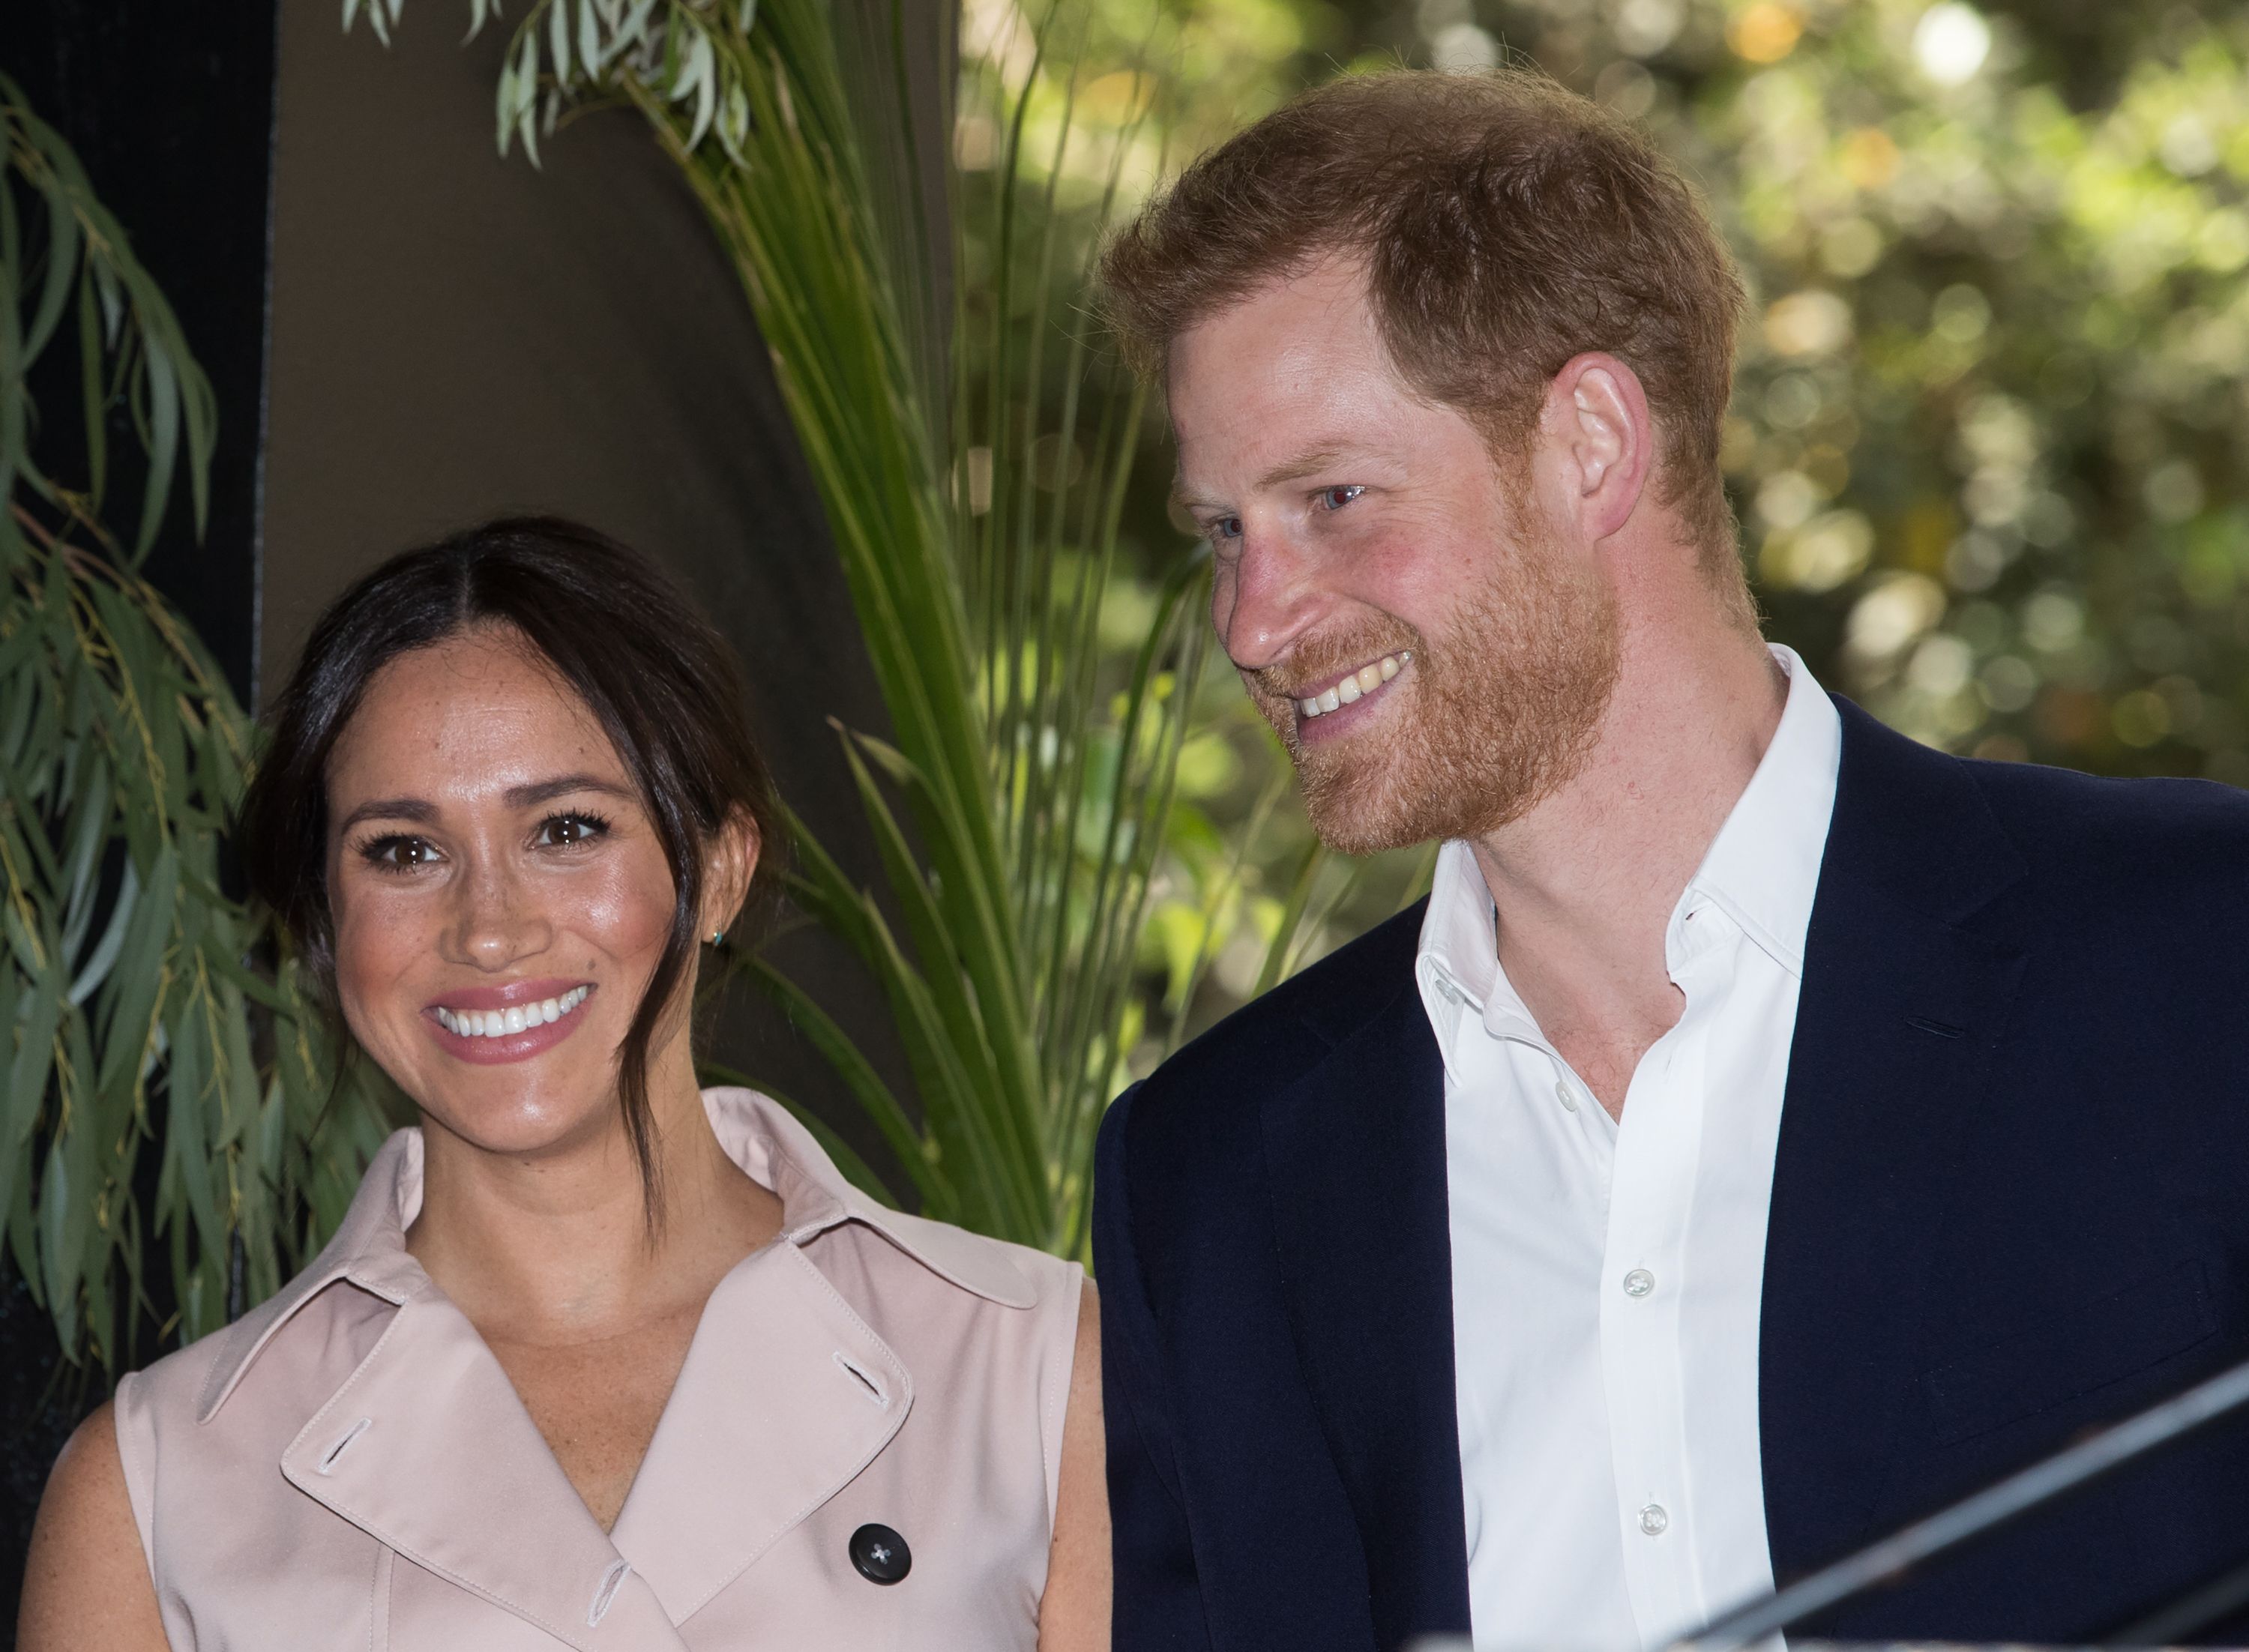 Prince Harry And Meghan Markle’s 'Biblical Moment', As Remembered By Royal Photographer